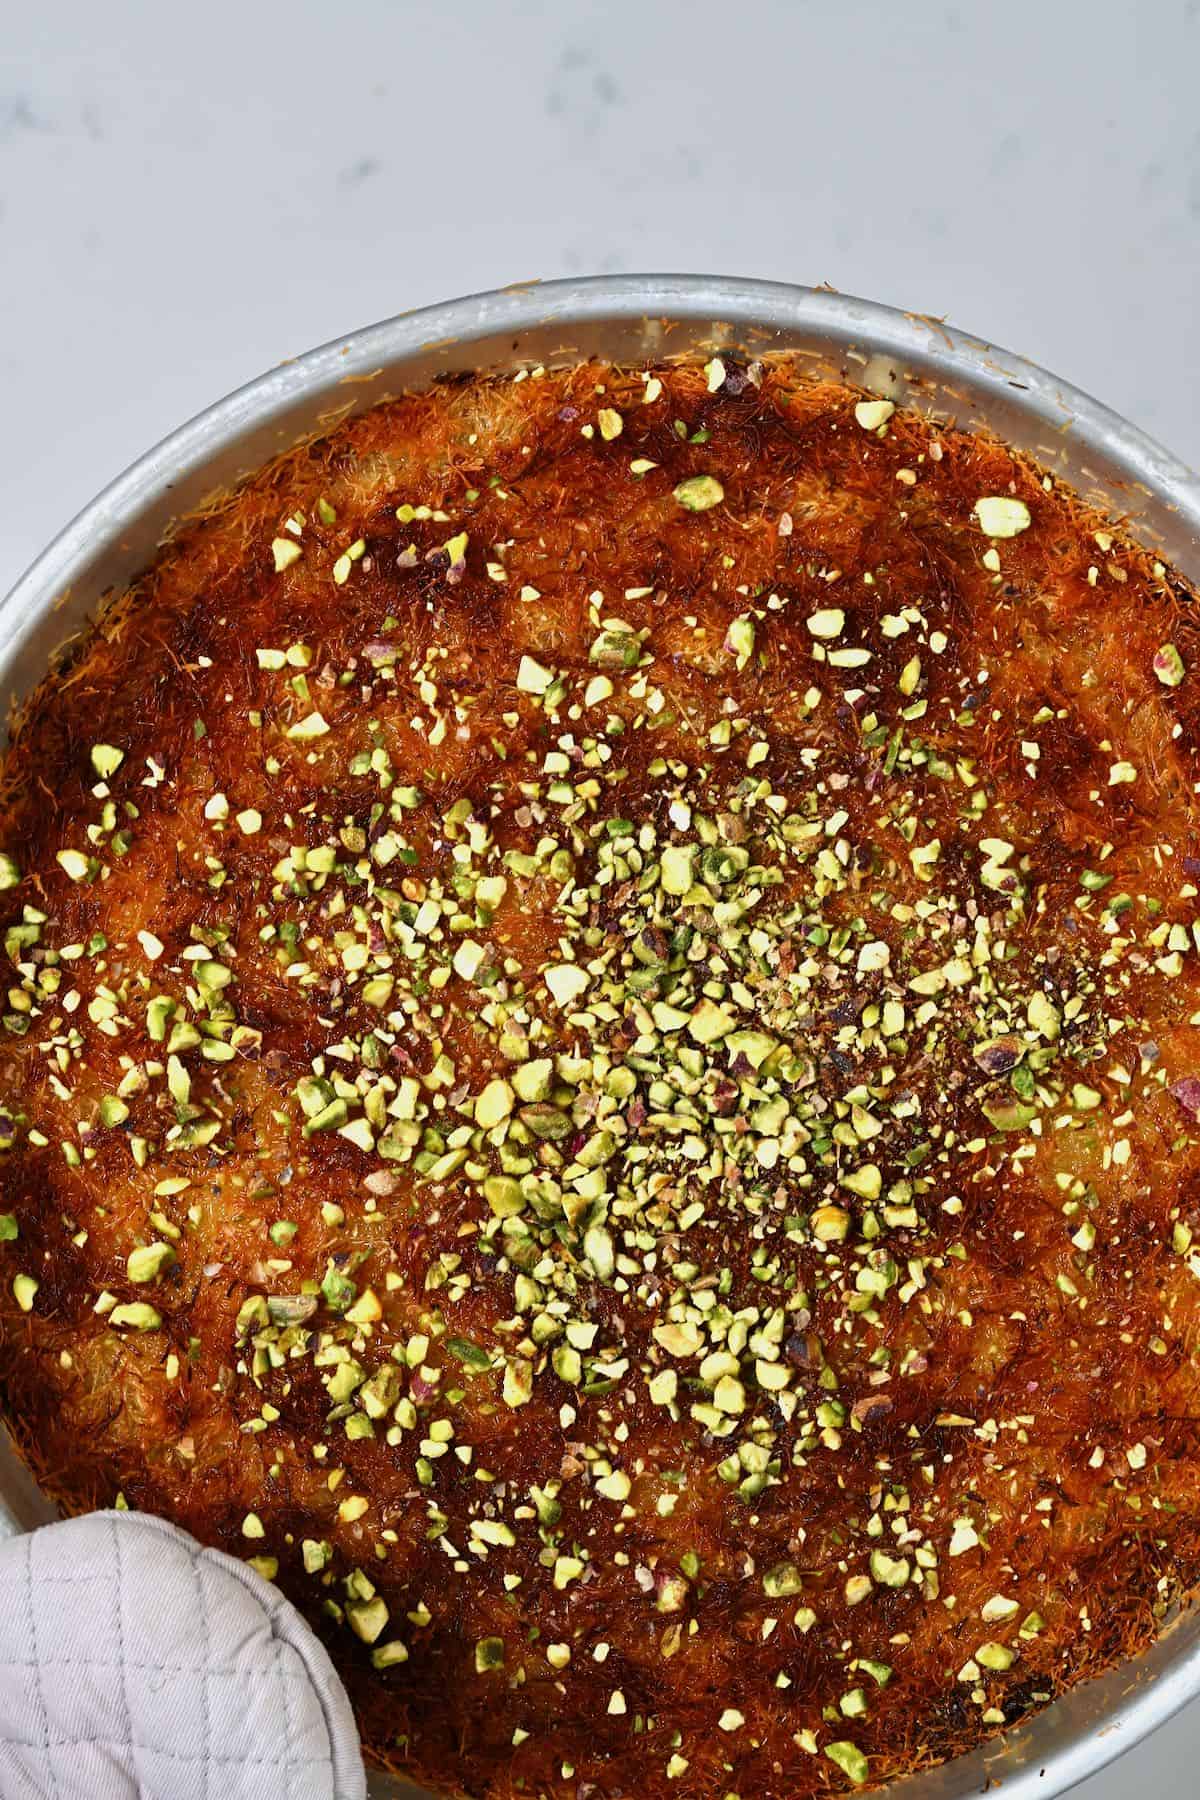 Homemade cheese kunafa topped with pistachios